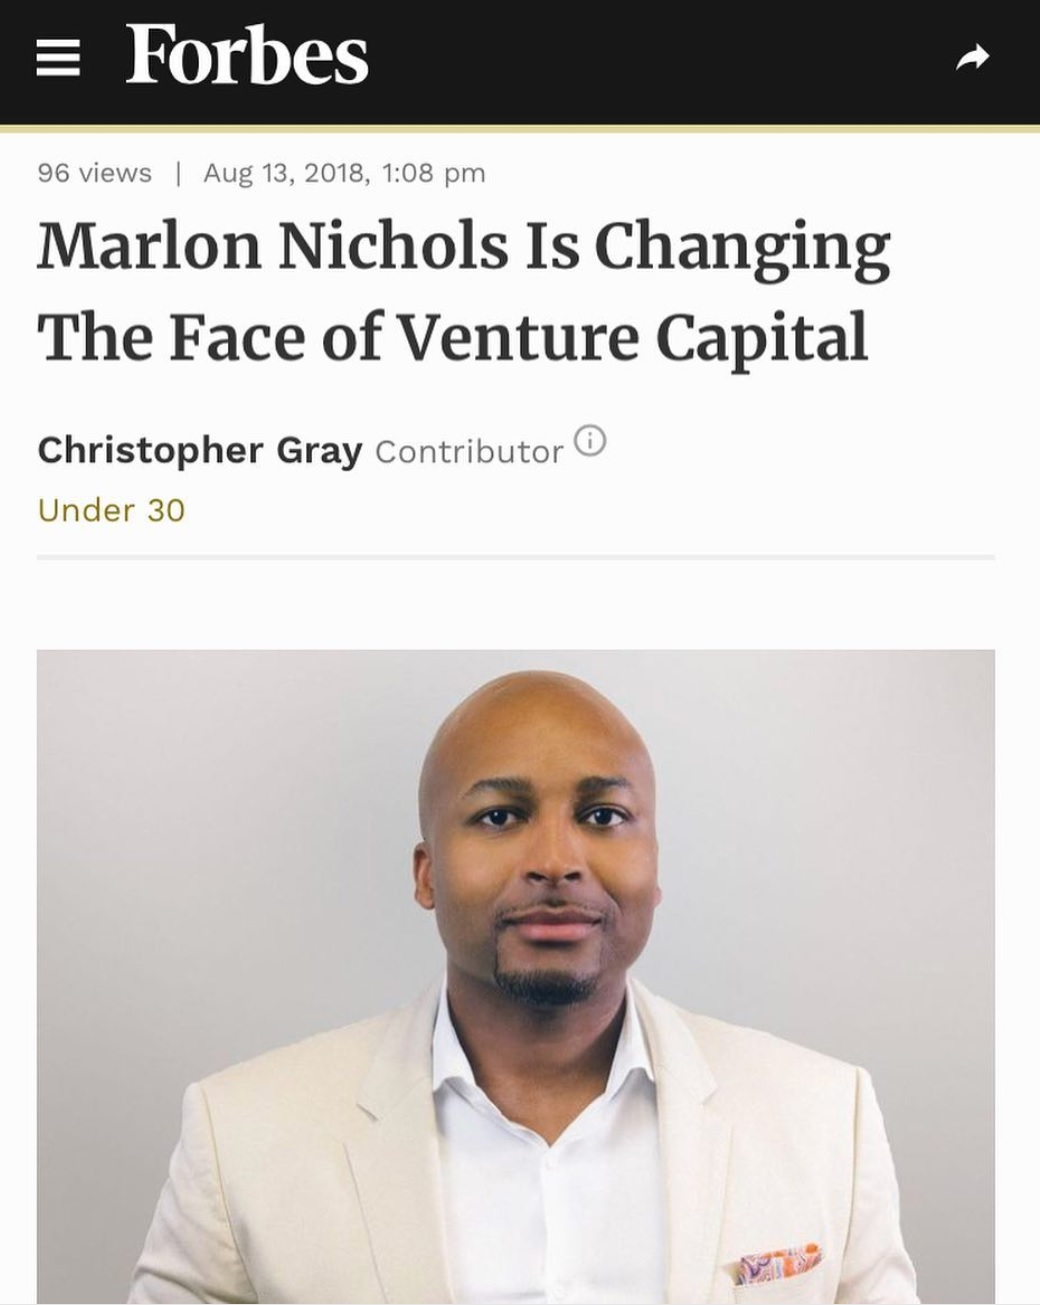 Forbes: Marlon Nichols Is Changing The Face of Venture Capital